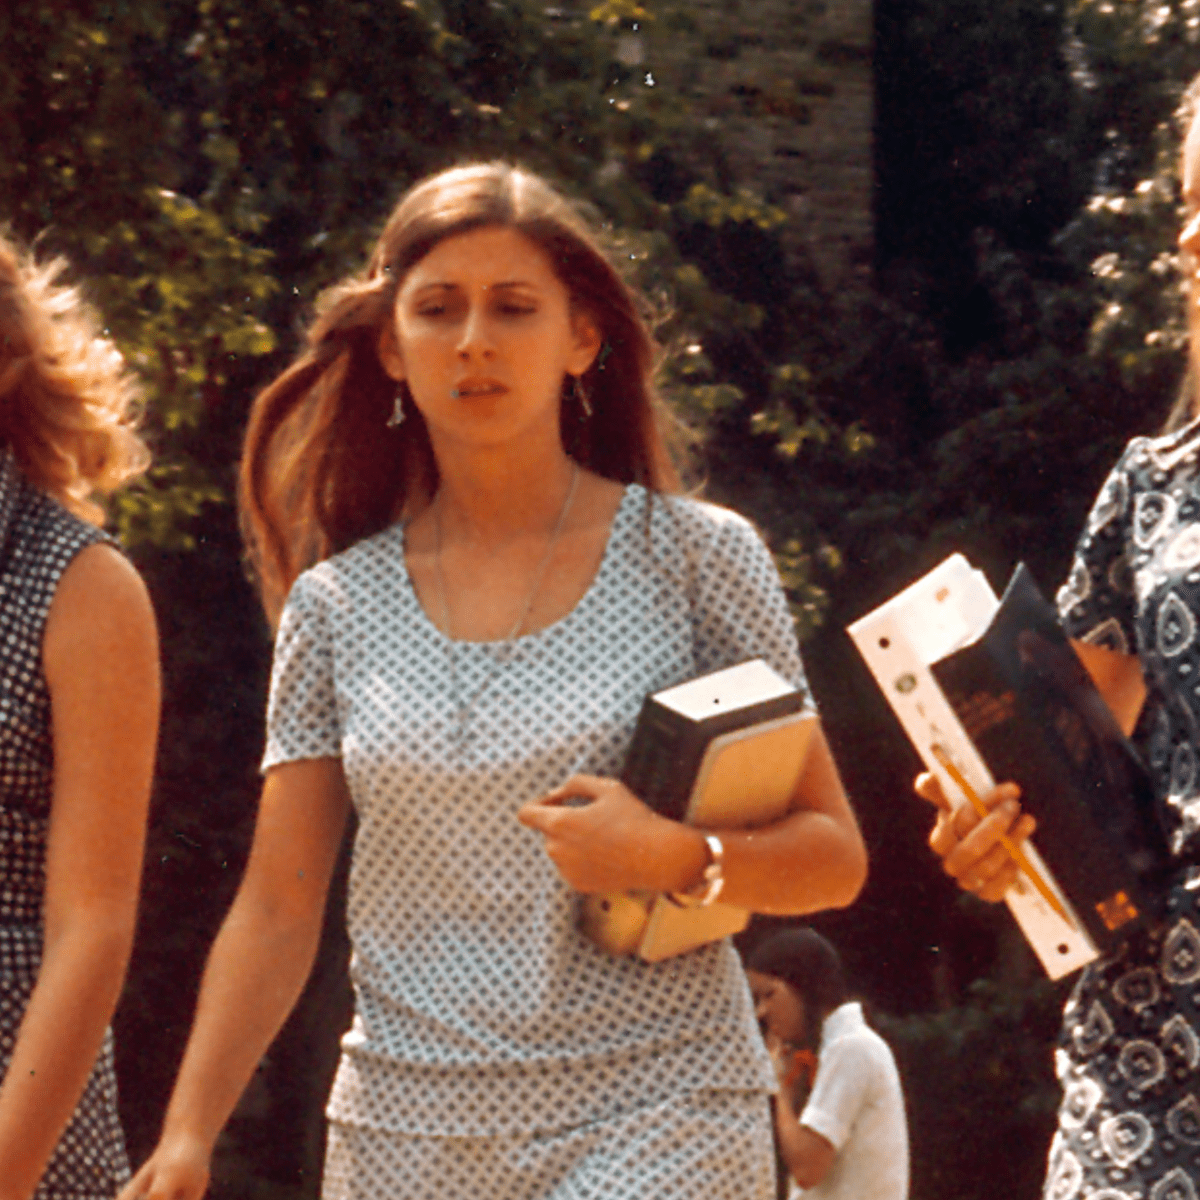 70s Fashion, What Did Women Wear in the 1970s?